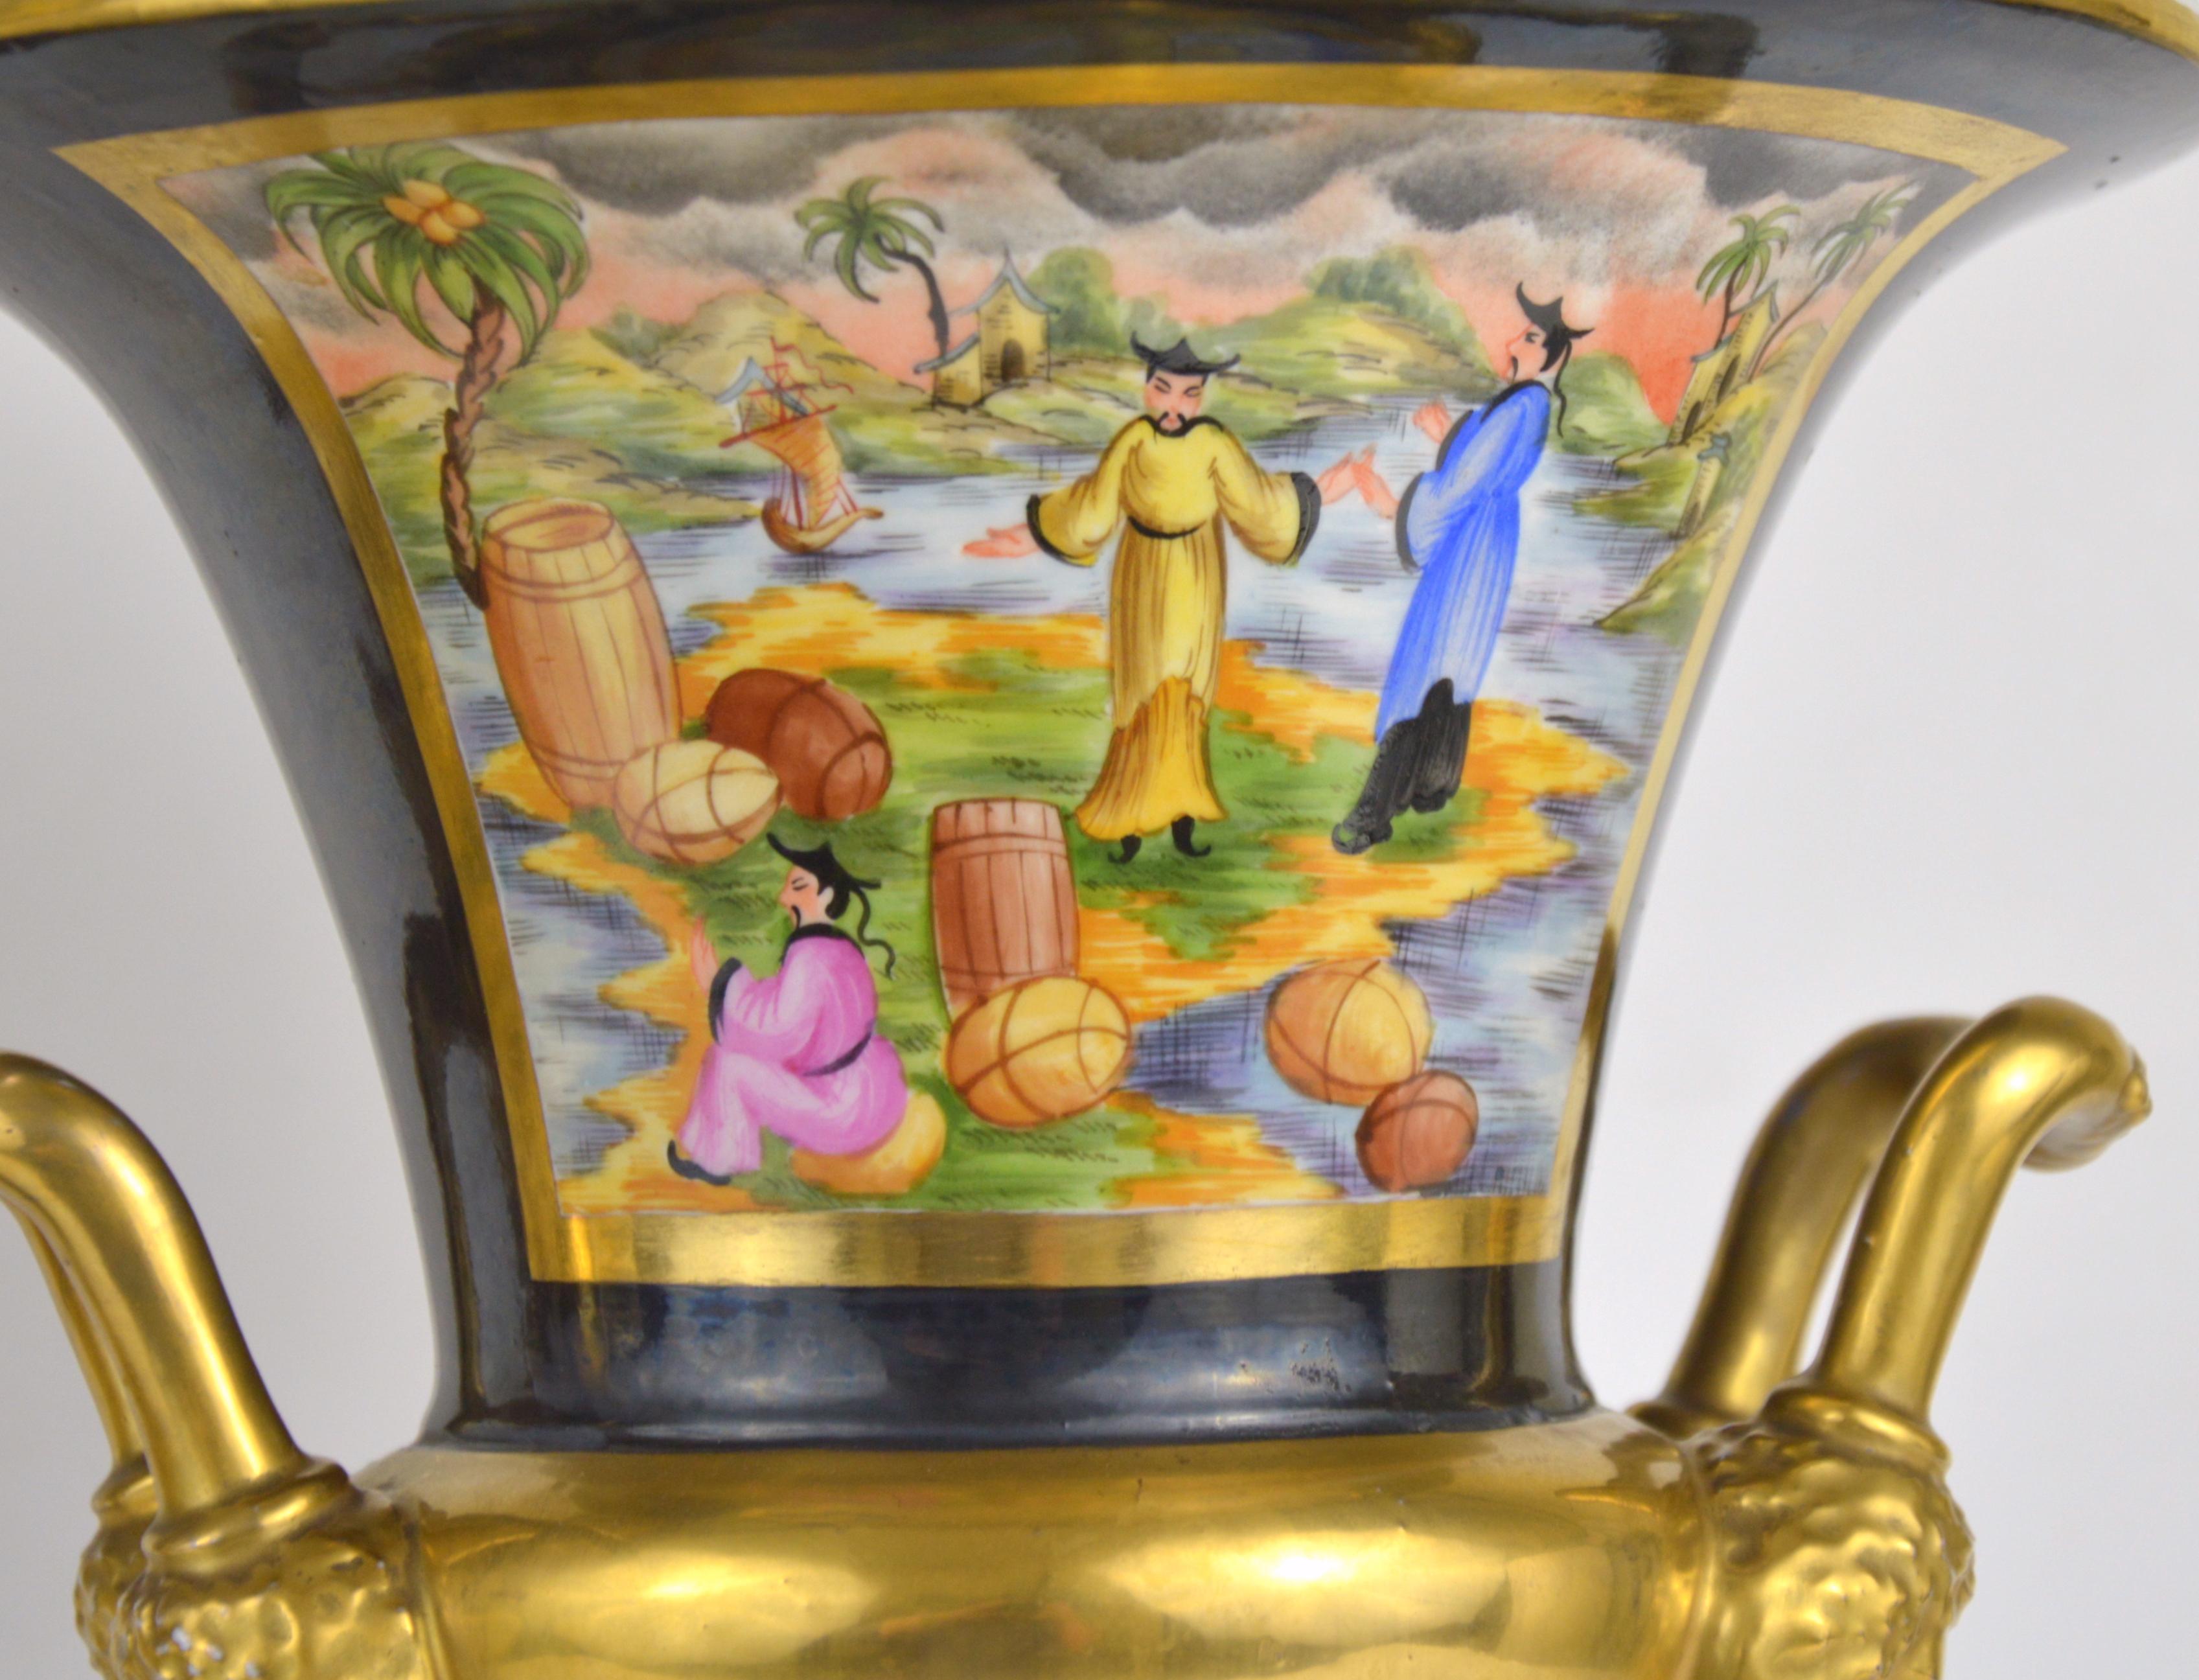 Pair of Medici porcelain vases. chinoiserie style hand painted overglaze decoration. Bearded-head mascarons shaped handles.
Measures: Height 32 cm, diameter 24 cm.
Condition report: Some wear to the gilding, small manufacturing defects (see the